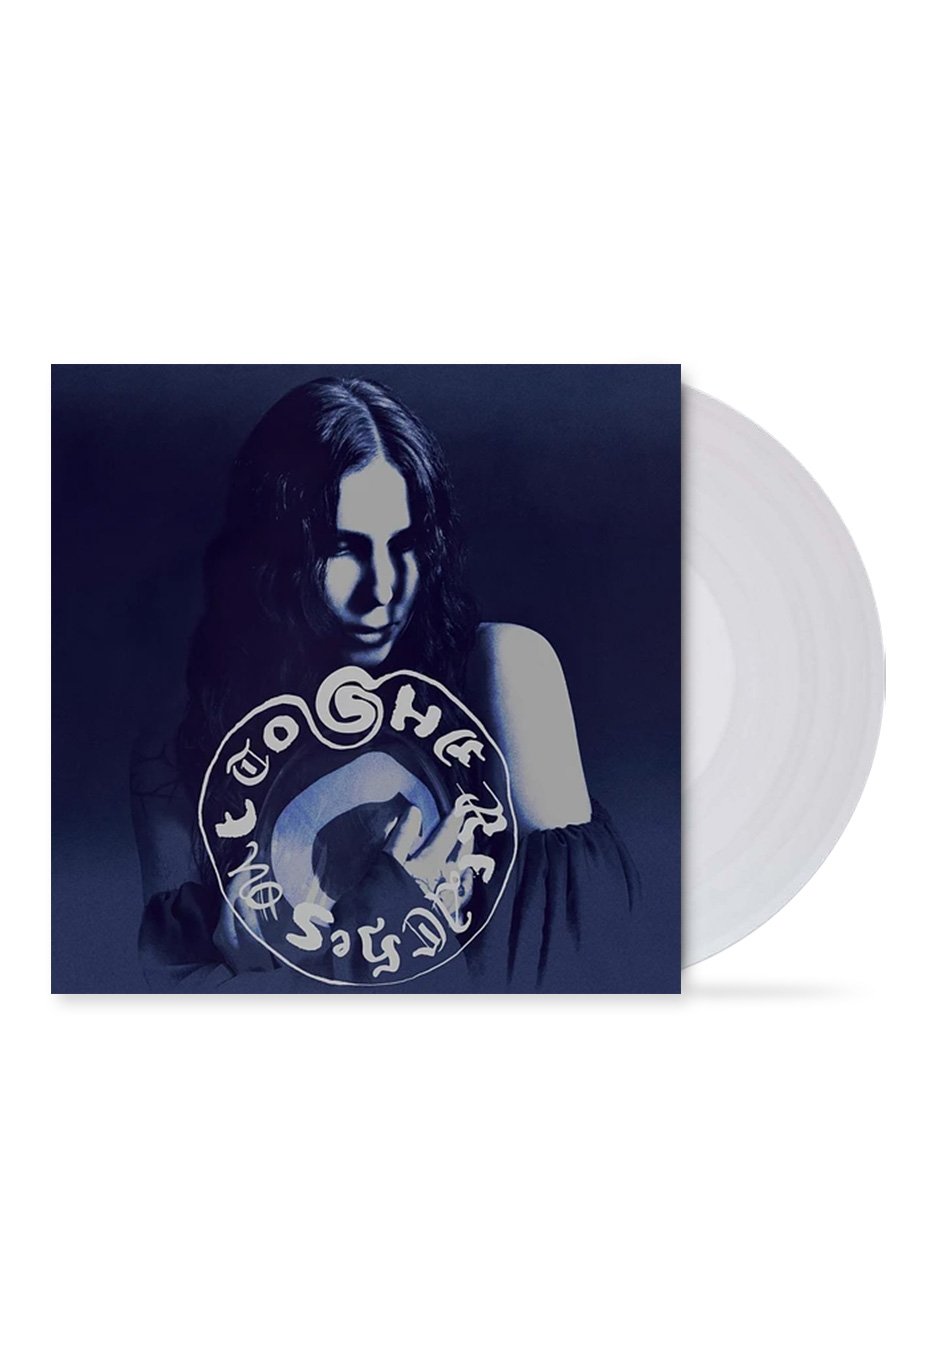 Chelsea Wolfe - She Reaches Out To She Reaches Out To She Ltd. Clear - Colored Vinyl